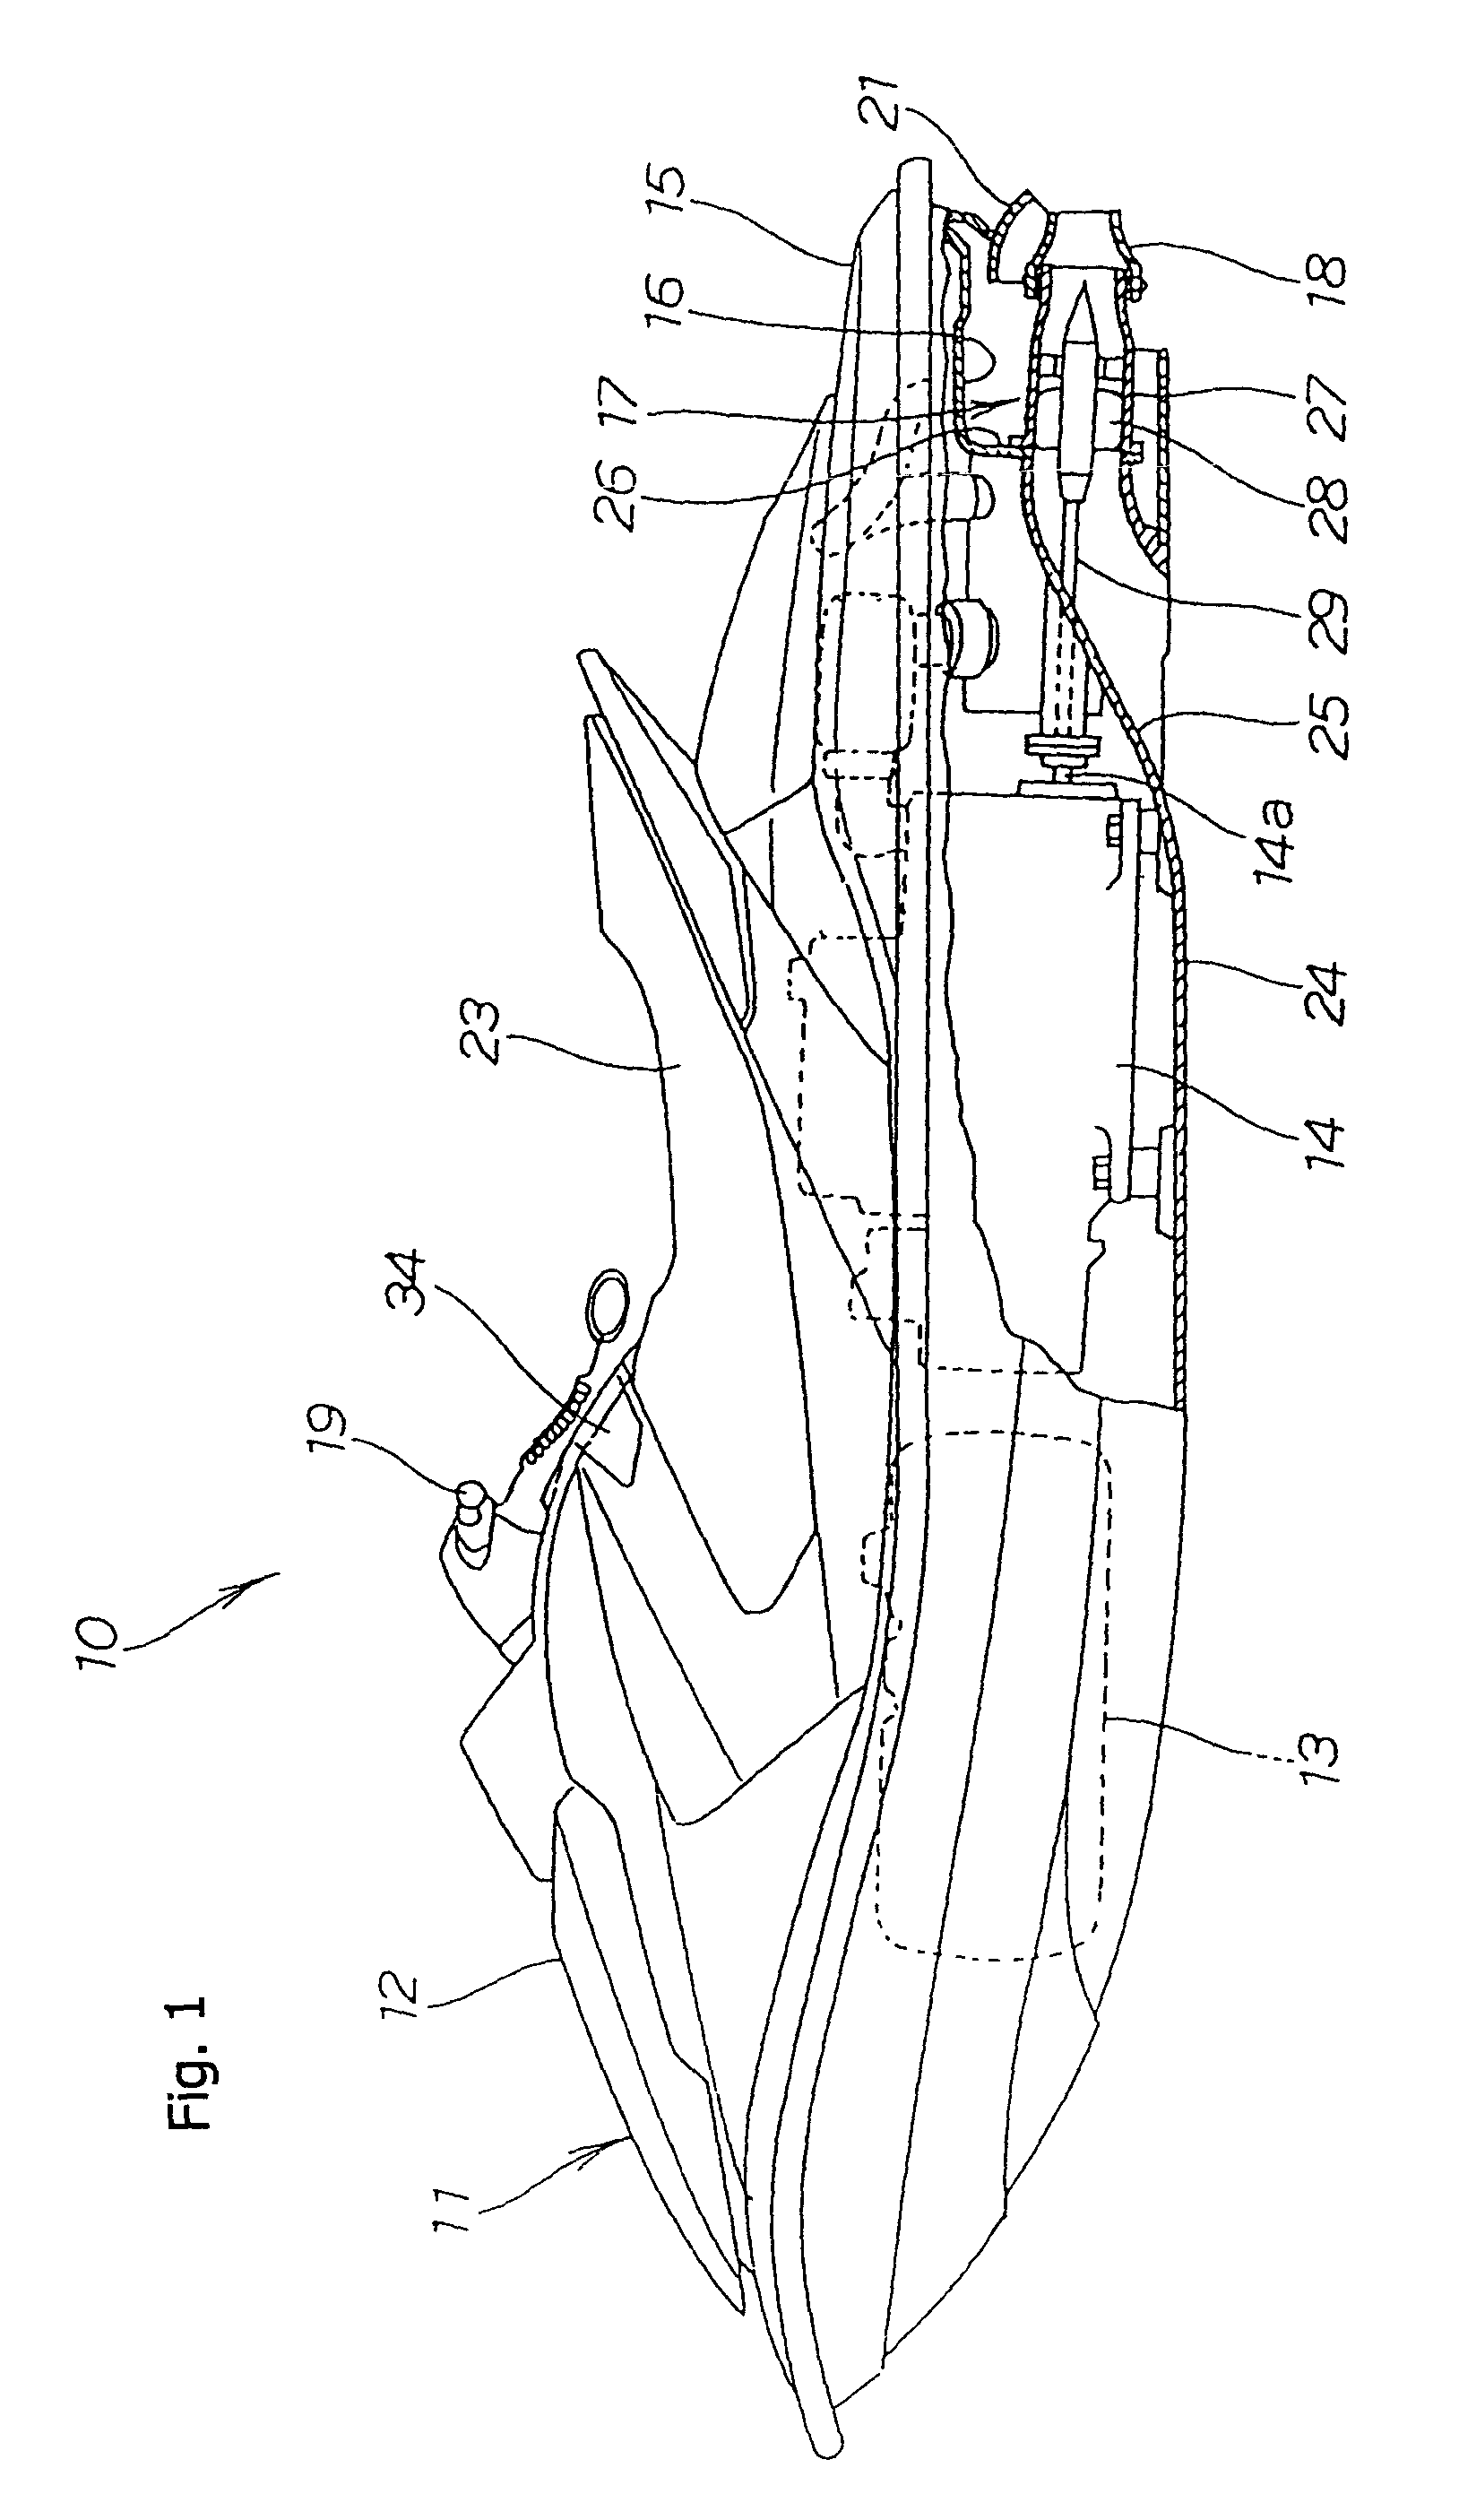 Lever-support bracket structure for a small waterboat